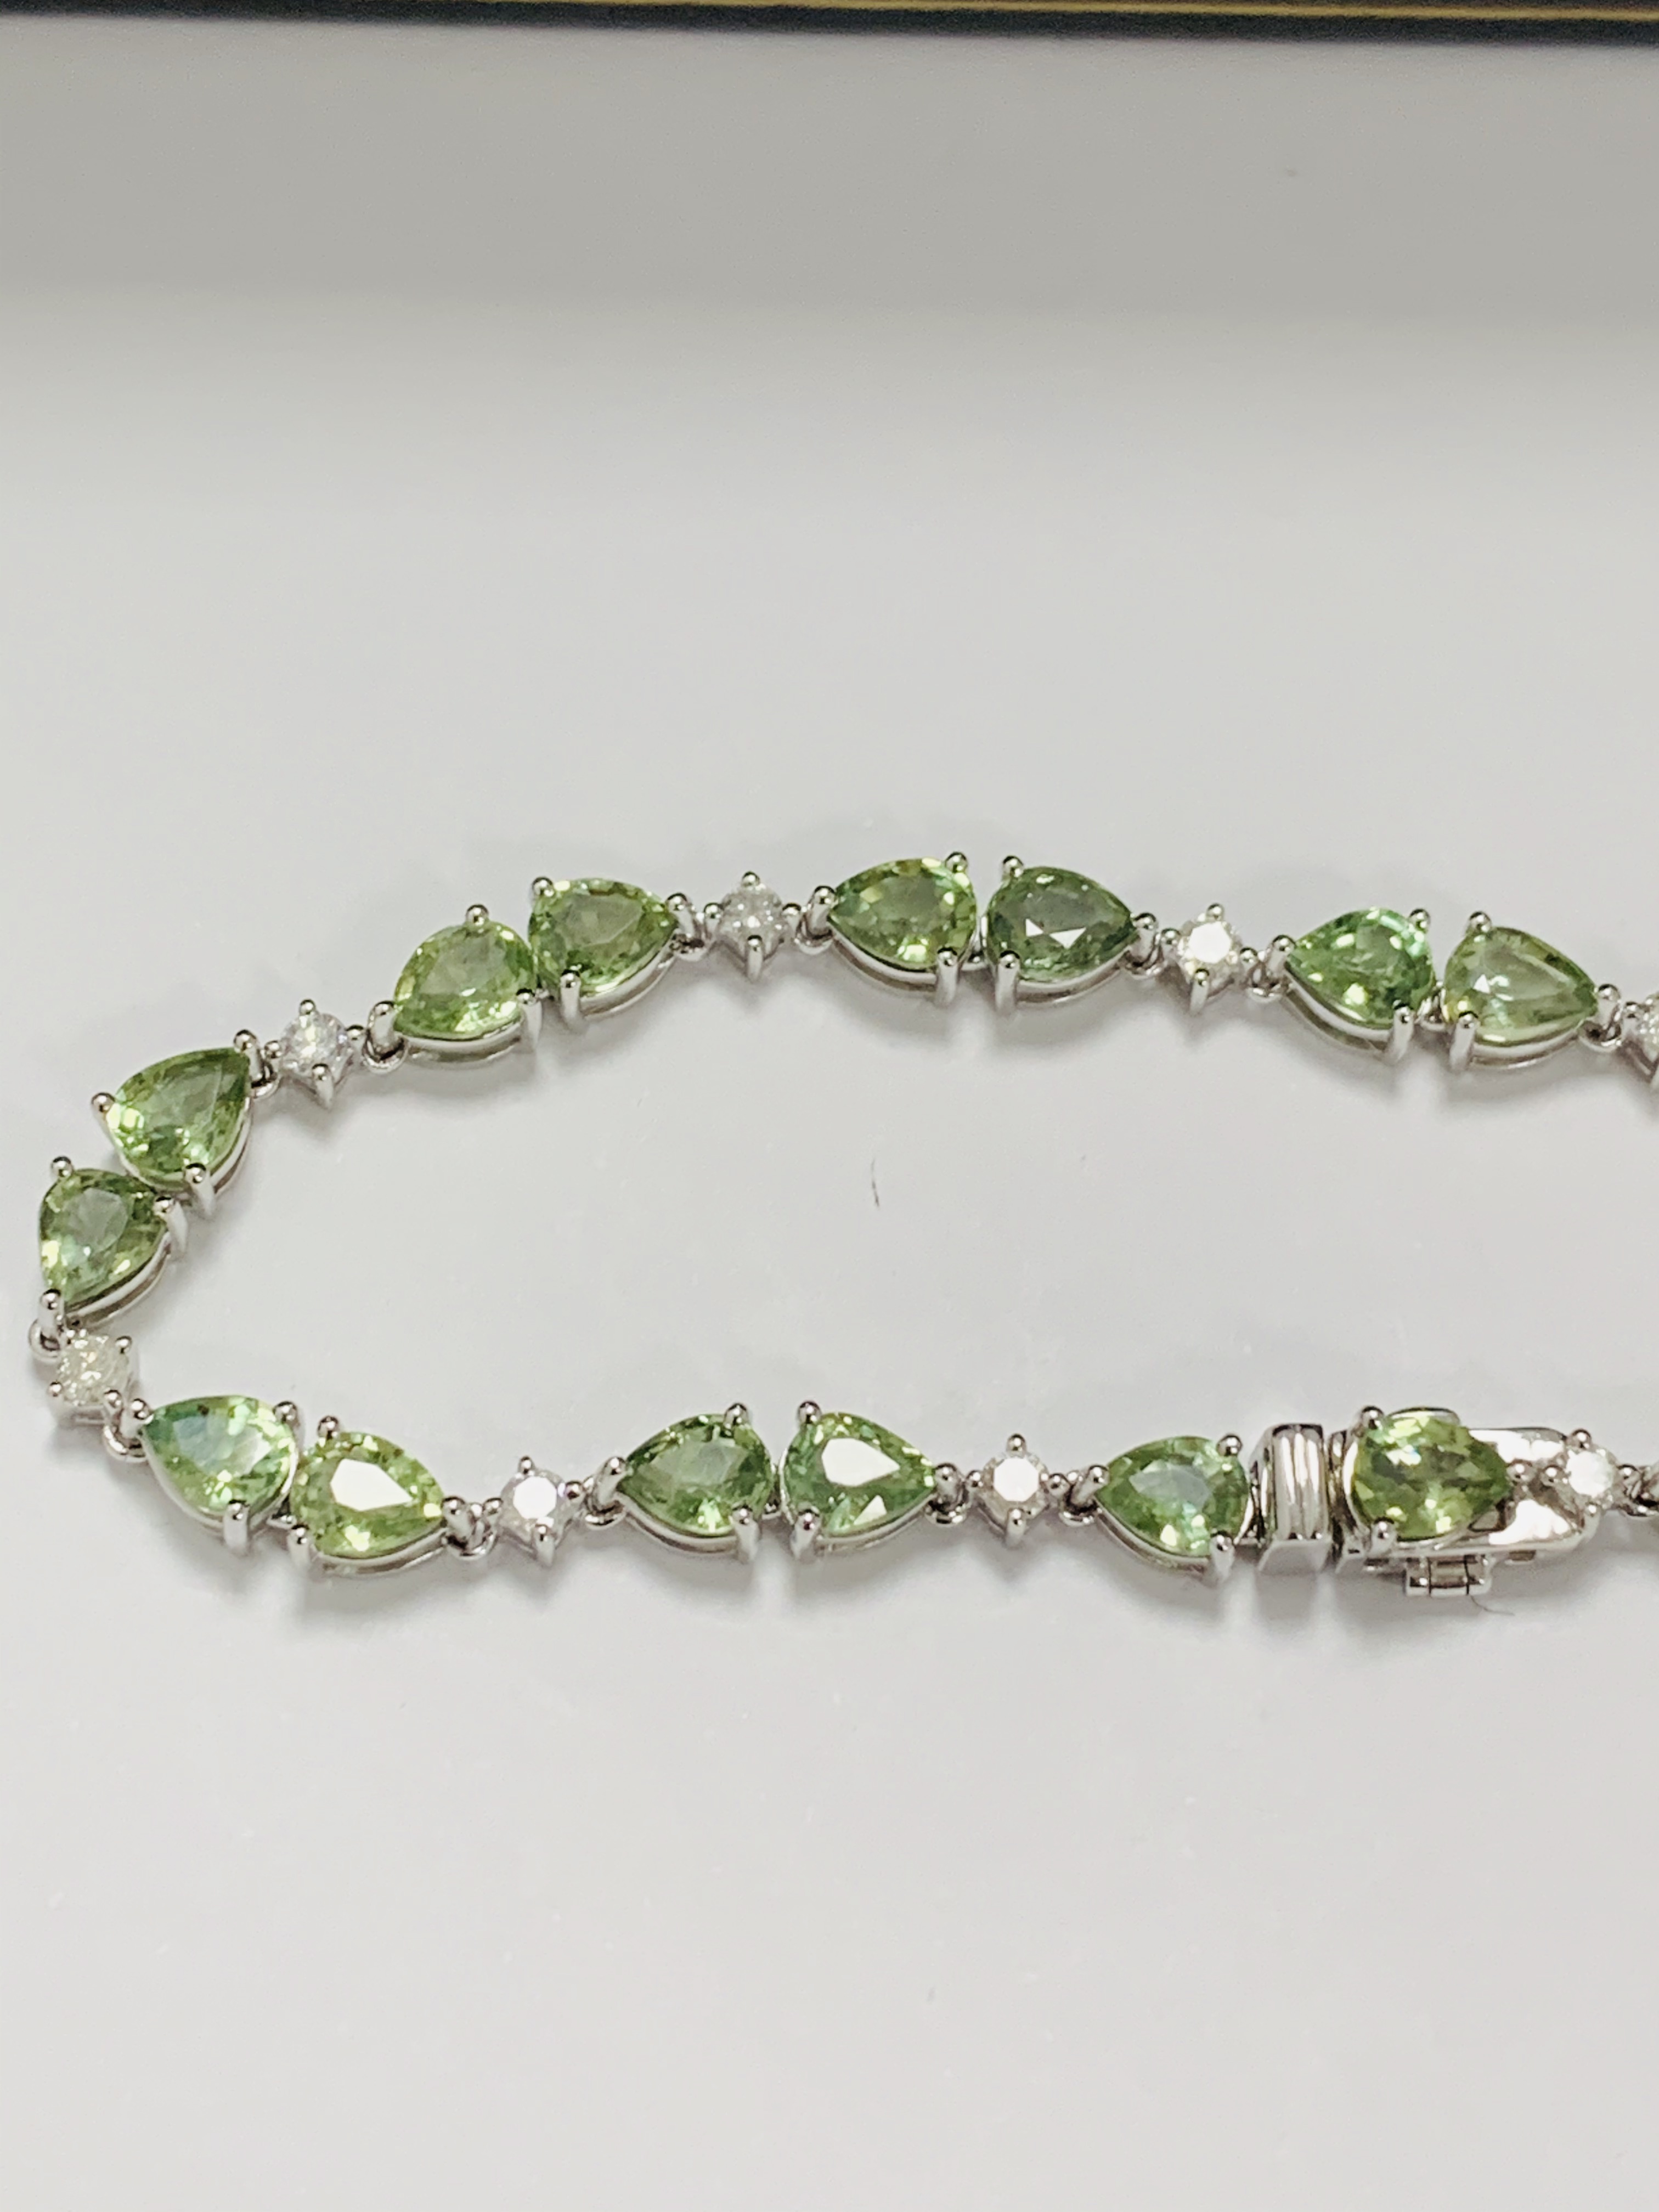 14ct White Gold Sapphire and Diamond bracelet featuring, 22 pear cut, light green Sapphires (9.05ct - Image 2 of 12